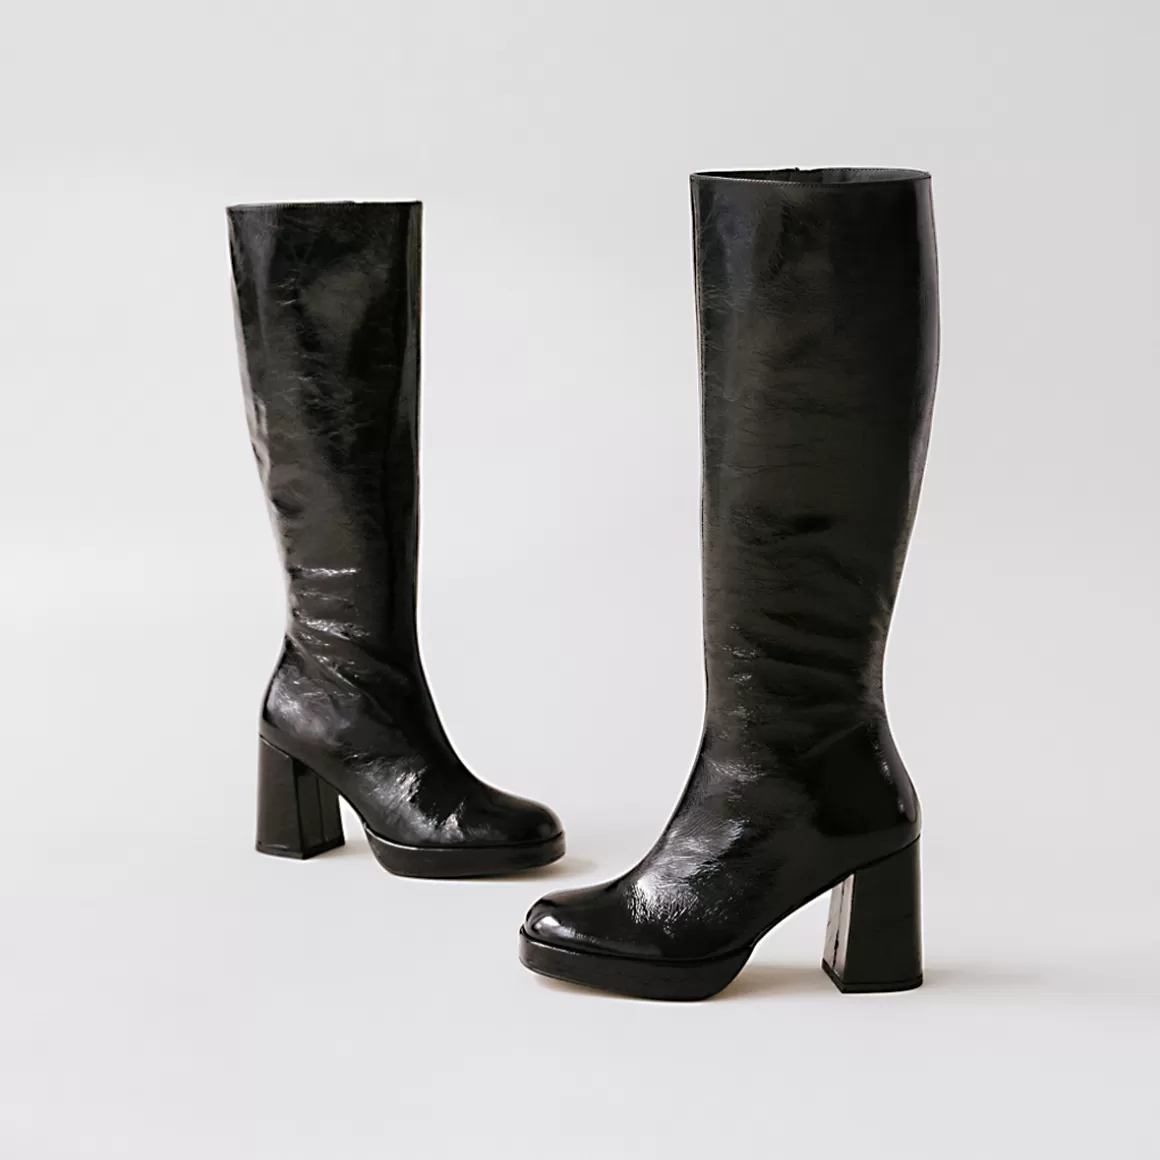 High round-toed boots<Jonak New